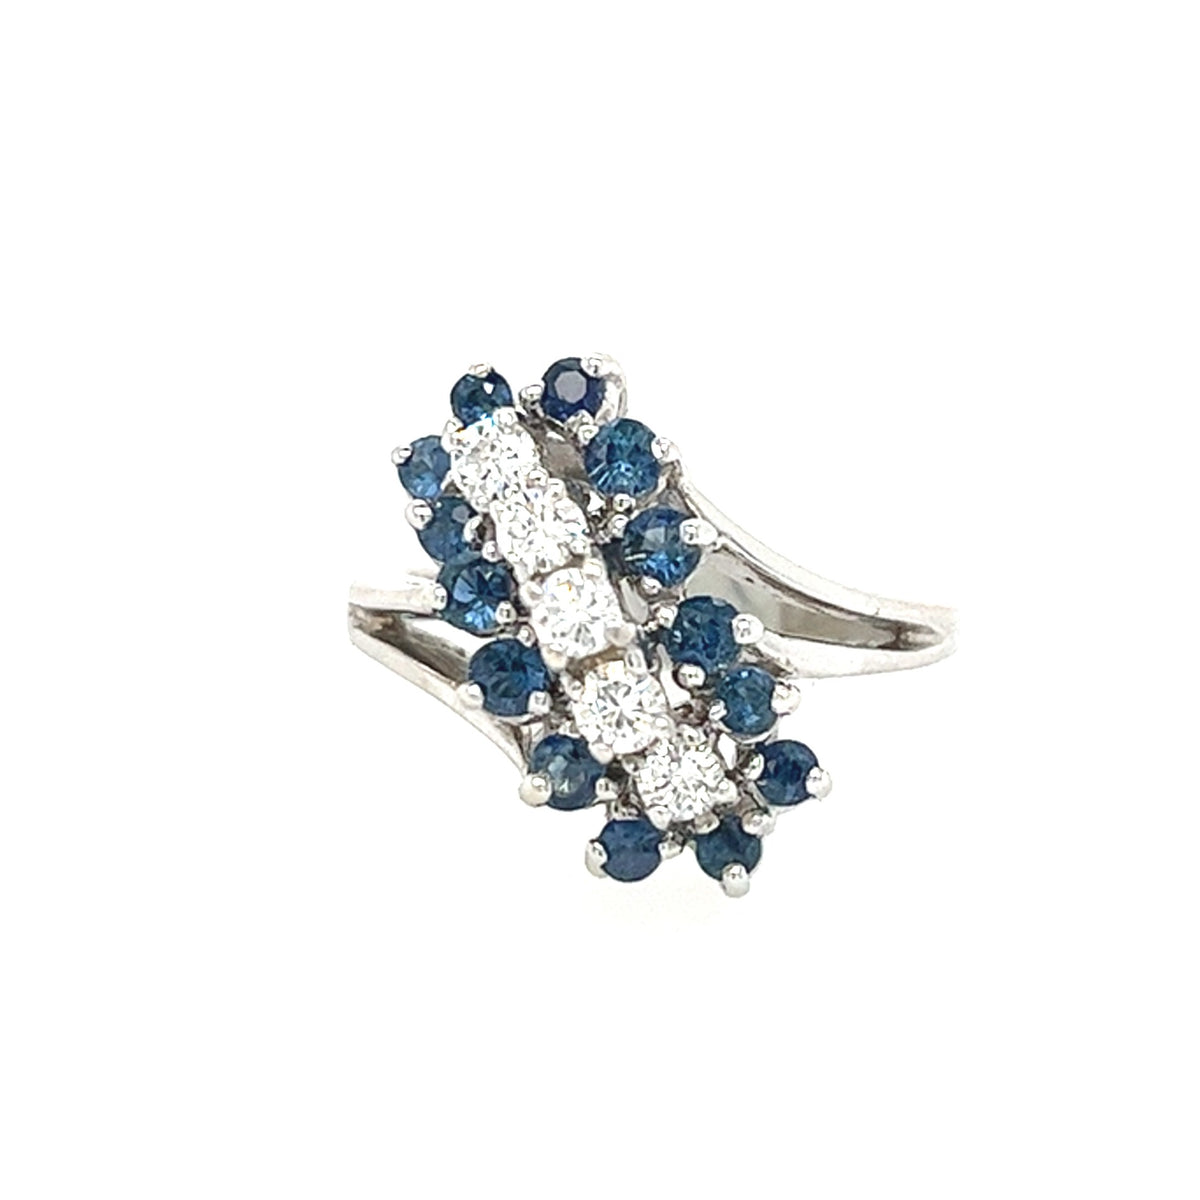 14KT WHITE GOLD FANCY DIAMOND AND SAPPHIRE LADIES RING